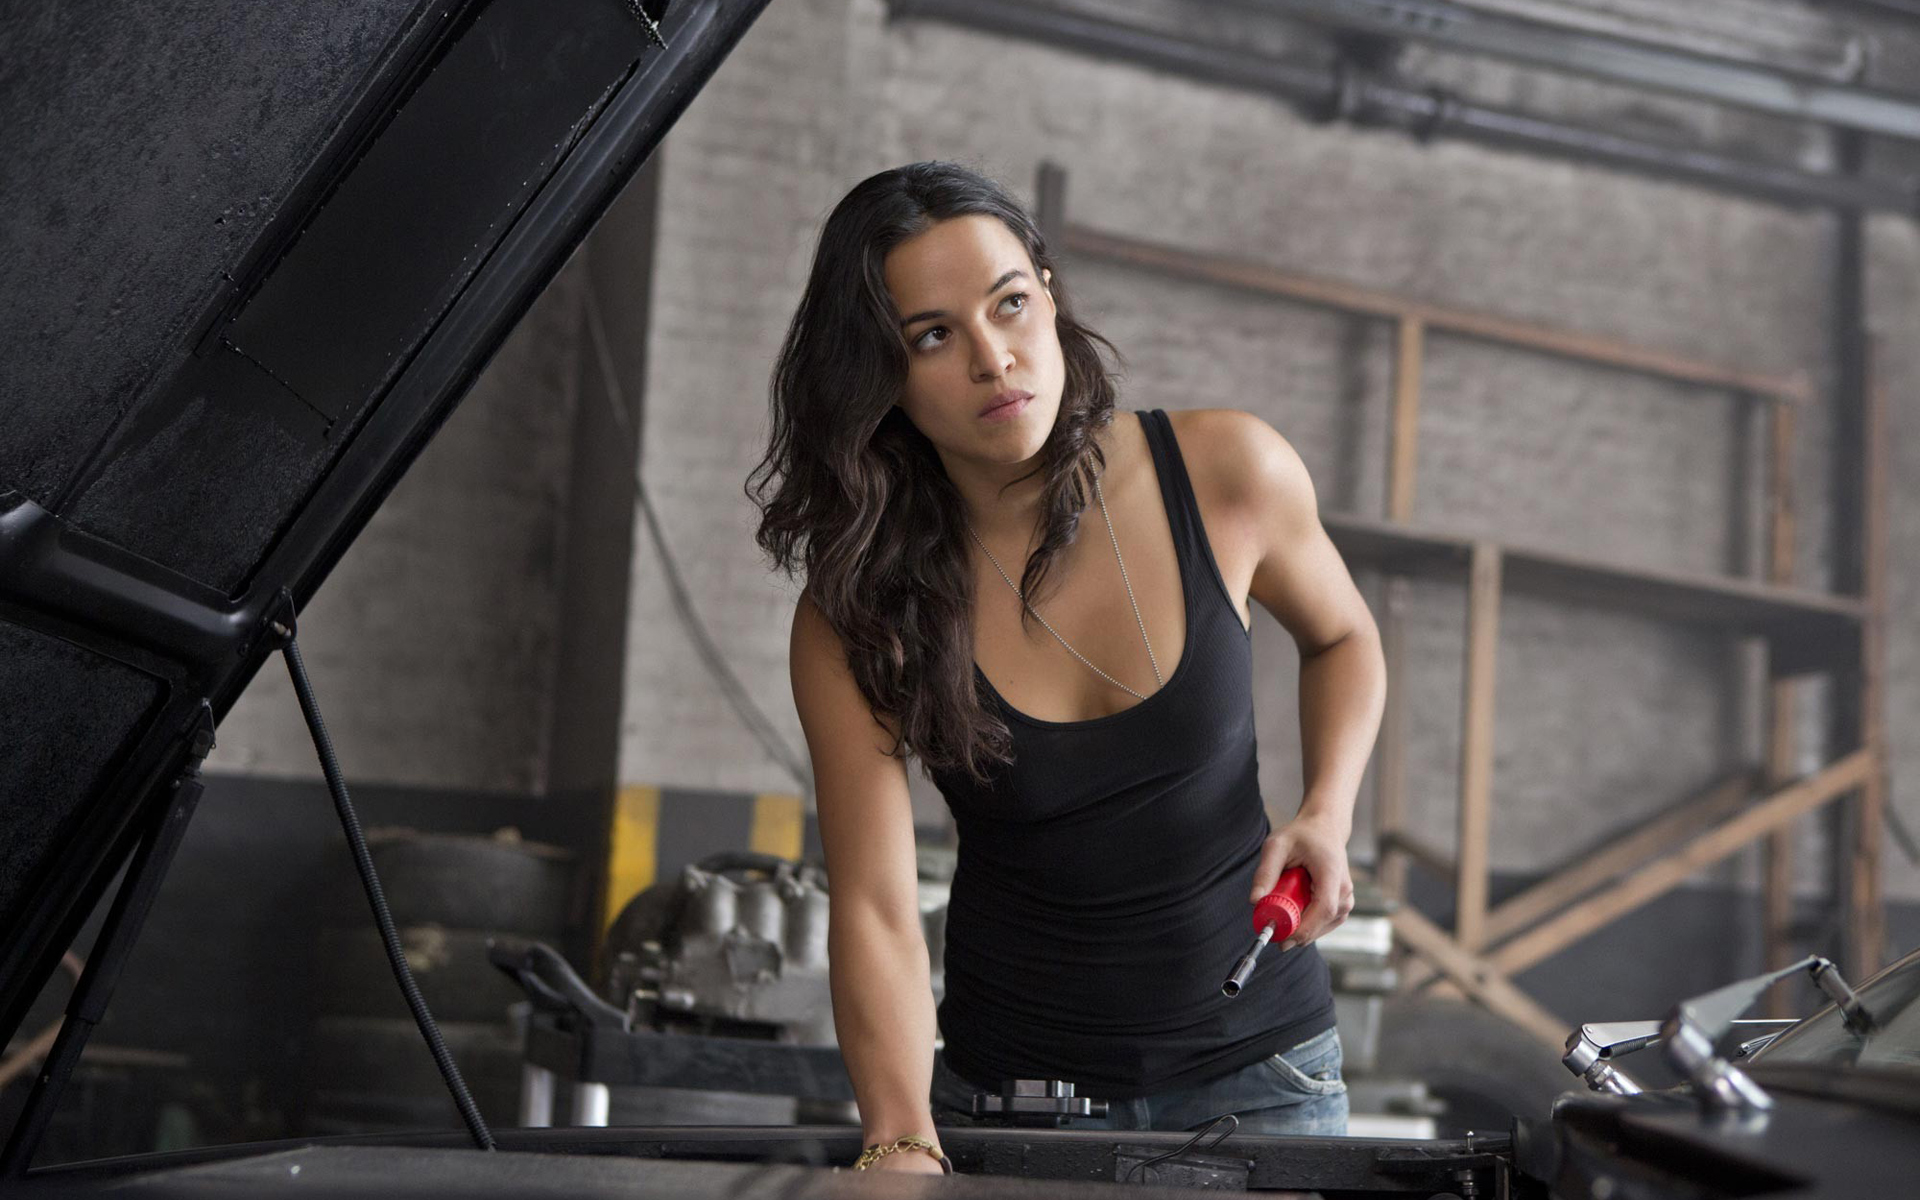 fast & furious, movie, fast & furious 6, letty ortiz, michelle rodriguez